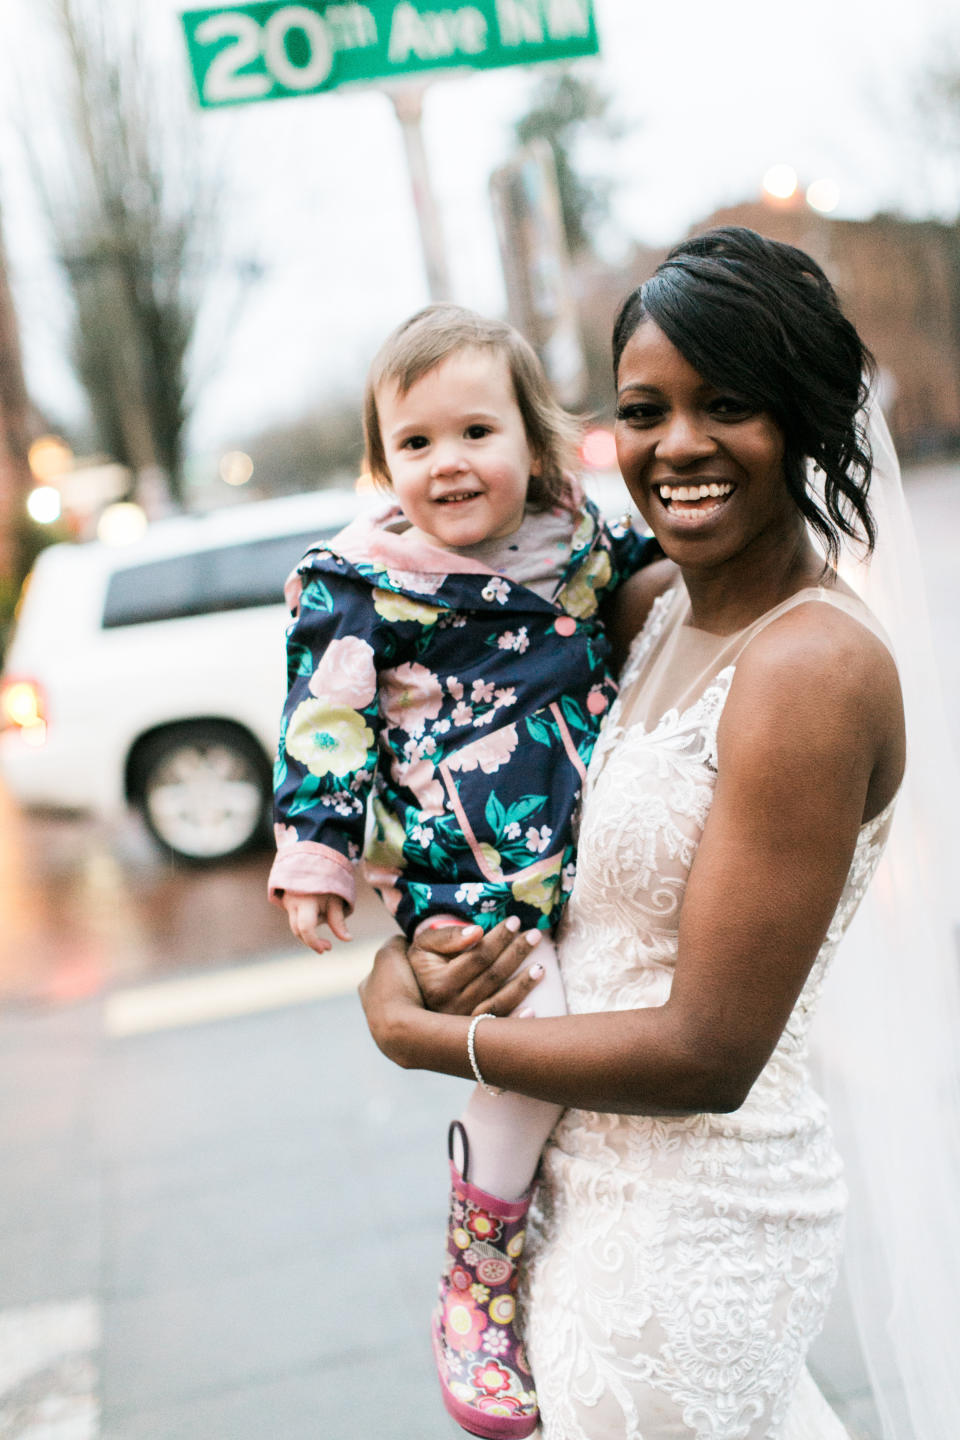 The beaming bride and her adorable fan. (Photo: <a href="http://www.stephaniecristalli.com/" target="_blank">Stephanie Cristalli</a>)